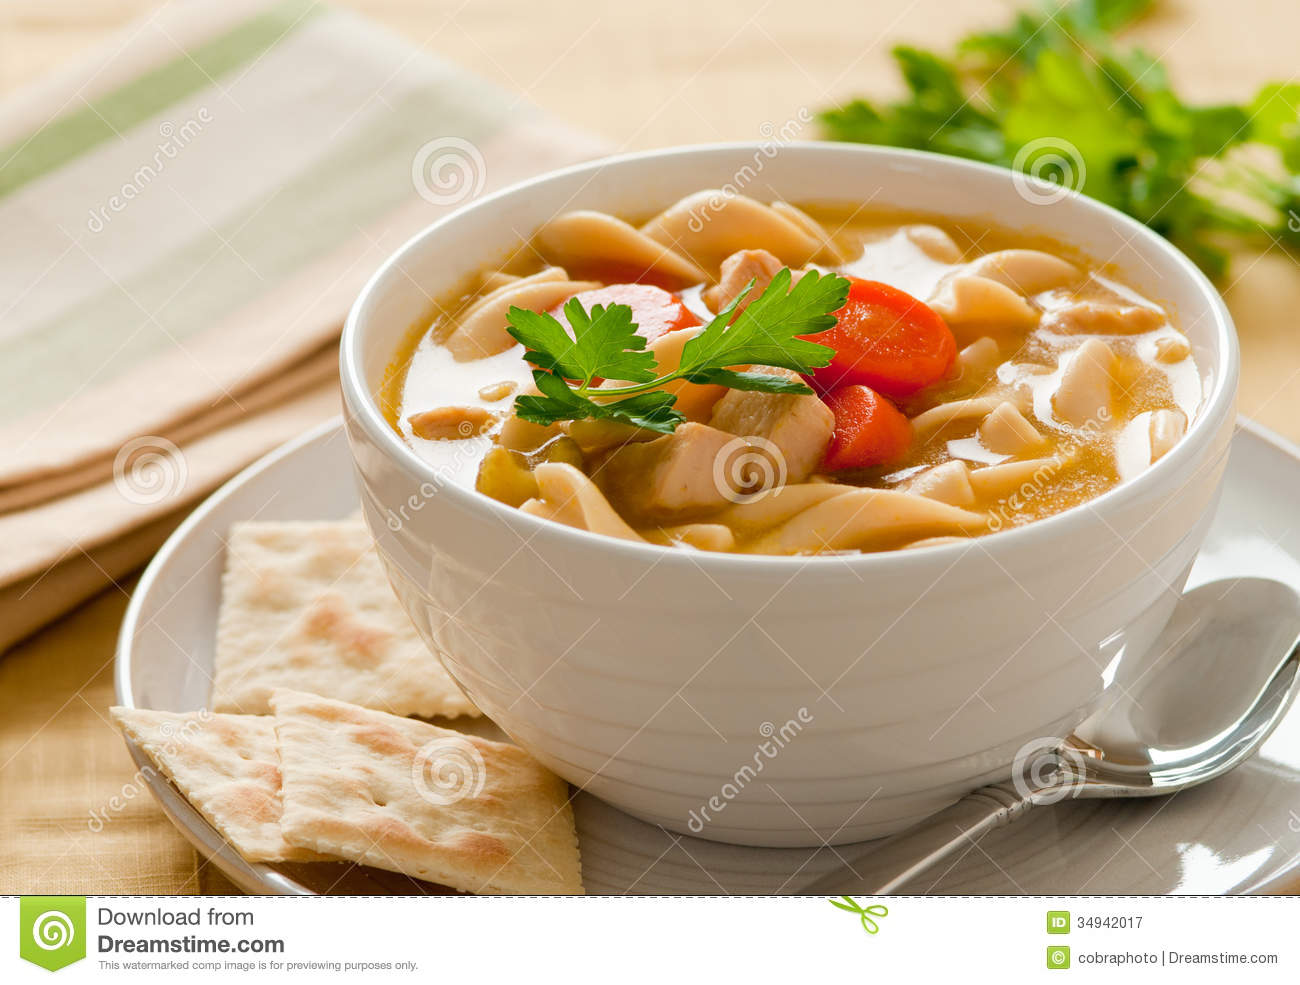 Chicken Noodle Soup Royalty Free Stock Photography   Image  34942017